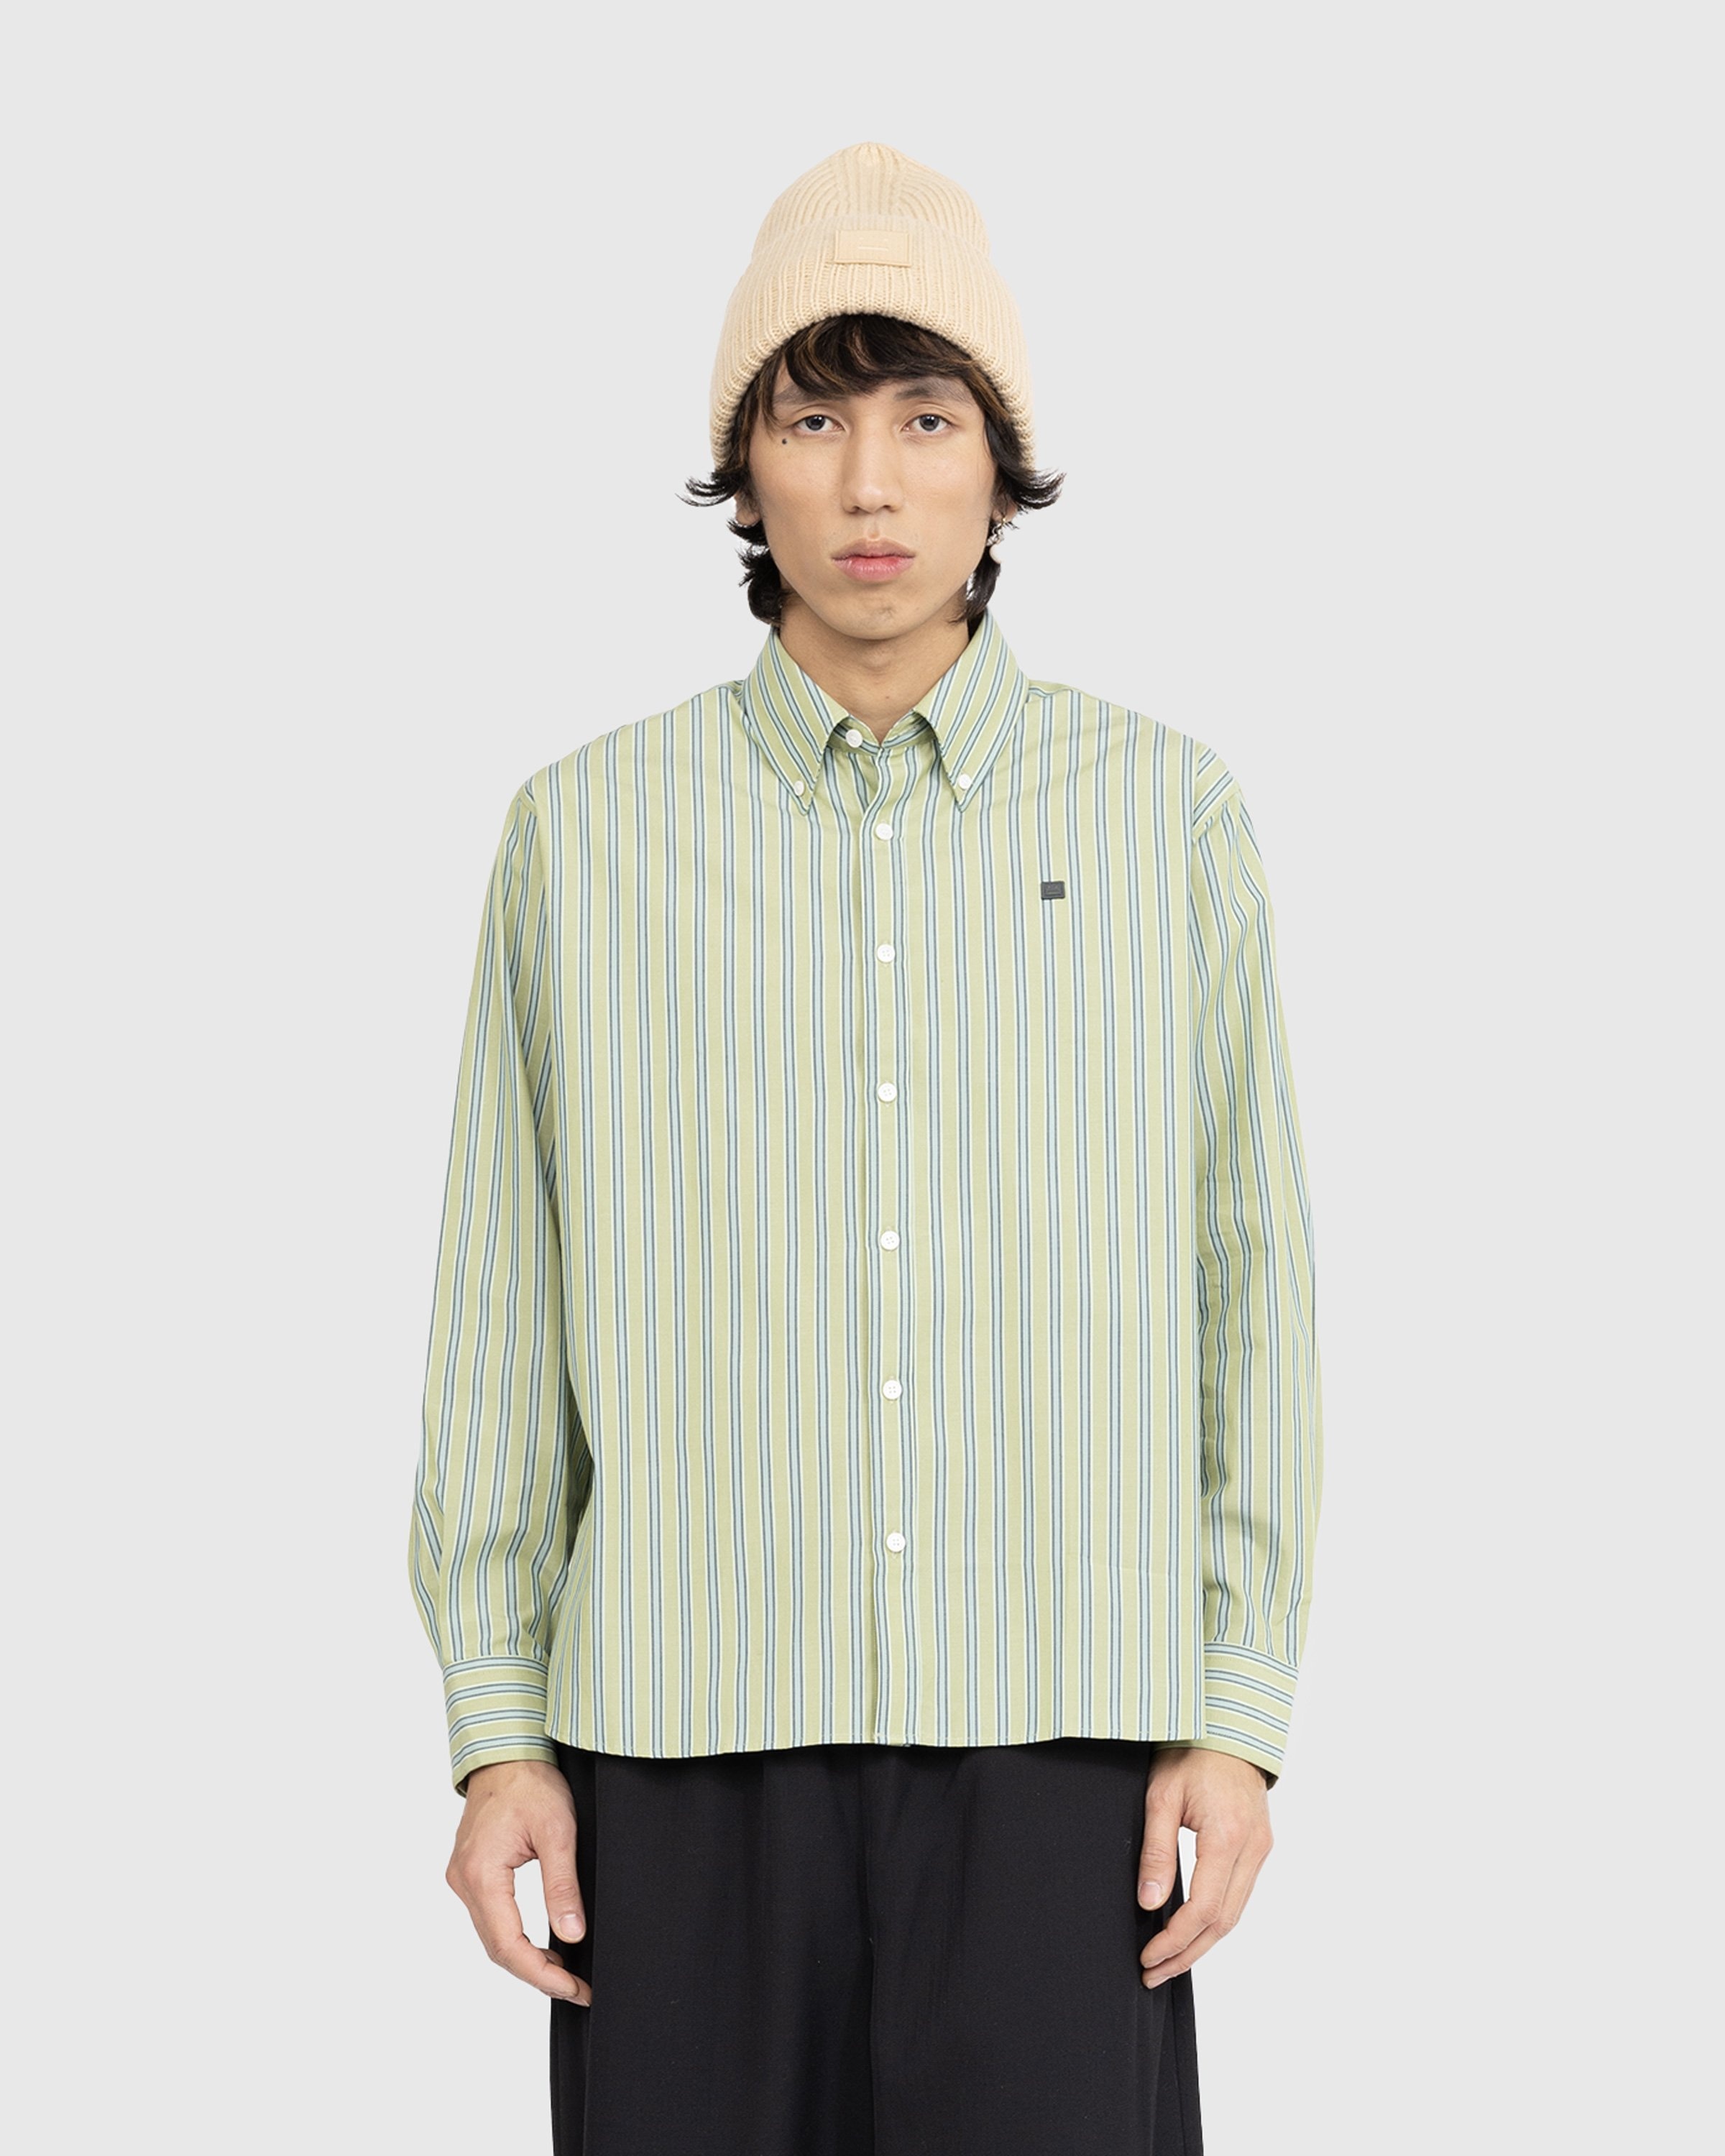 Supreme Small Box Shirt (White) All cotton with button down collar and  embroidered logo patch on chest.